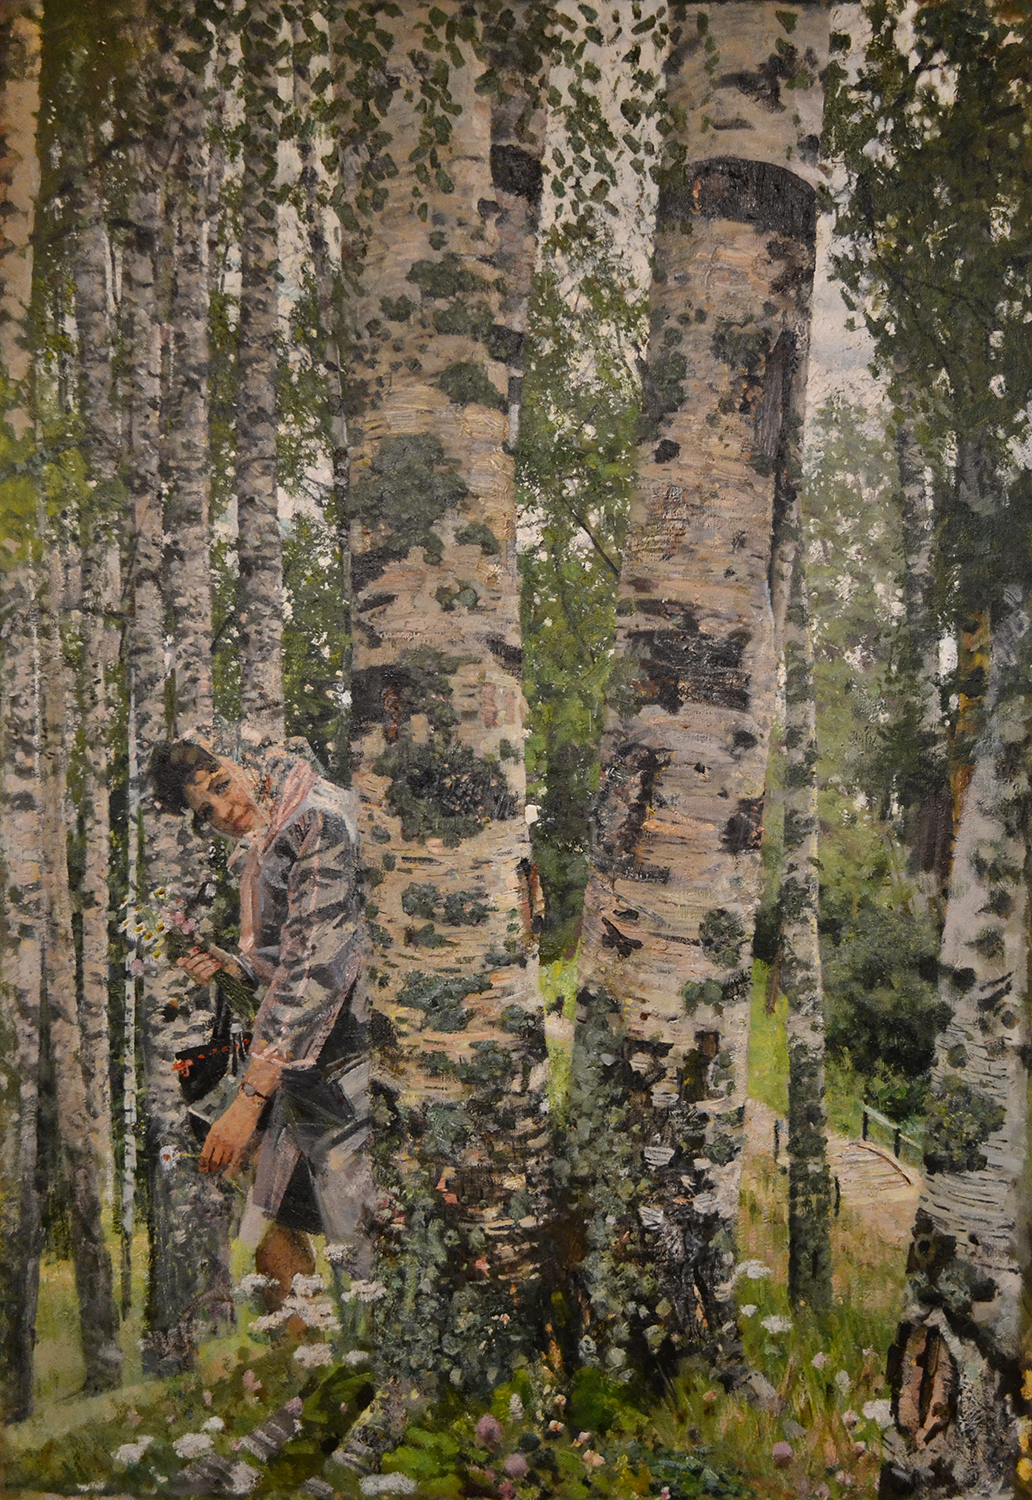 Akhmed Kitaev. Among the Birches, The Museum of Russian Art